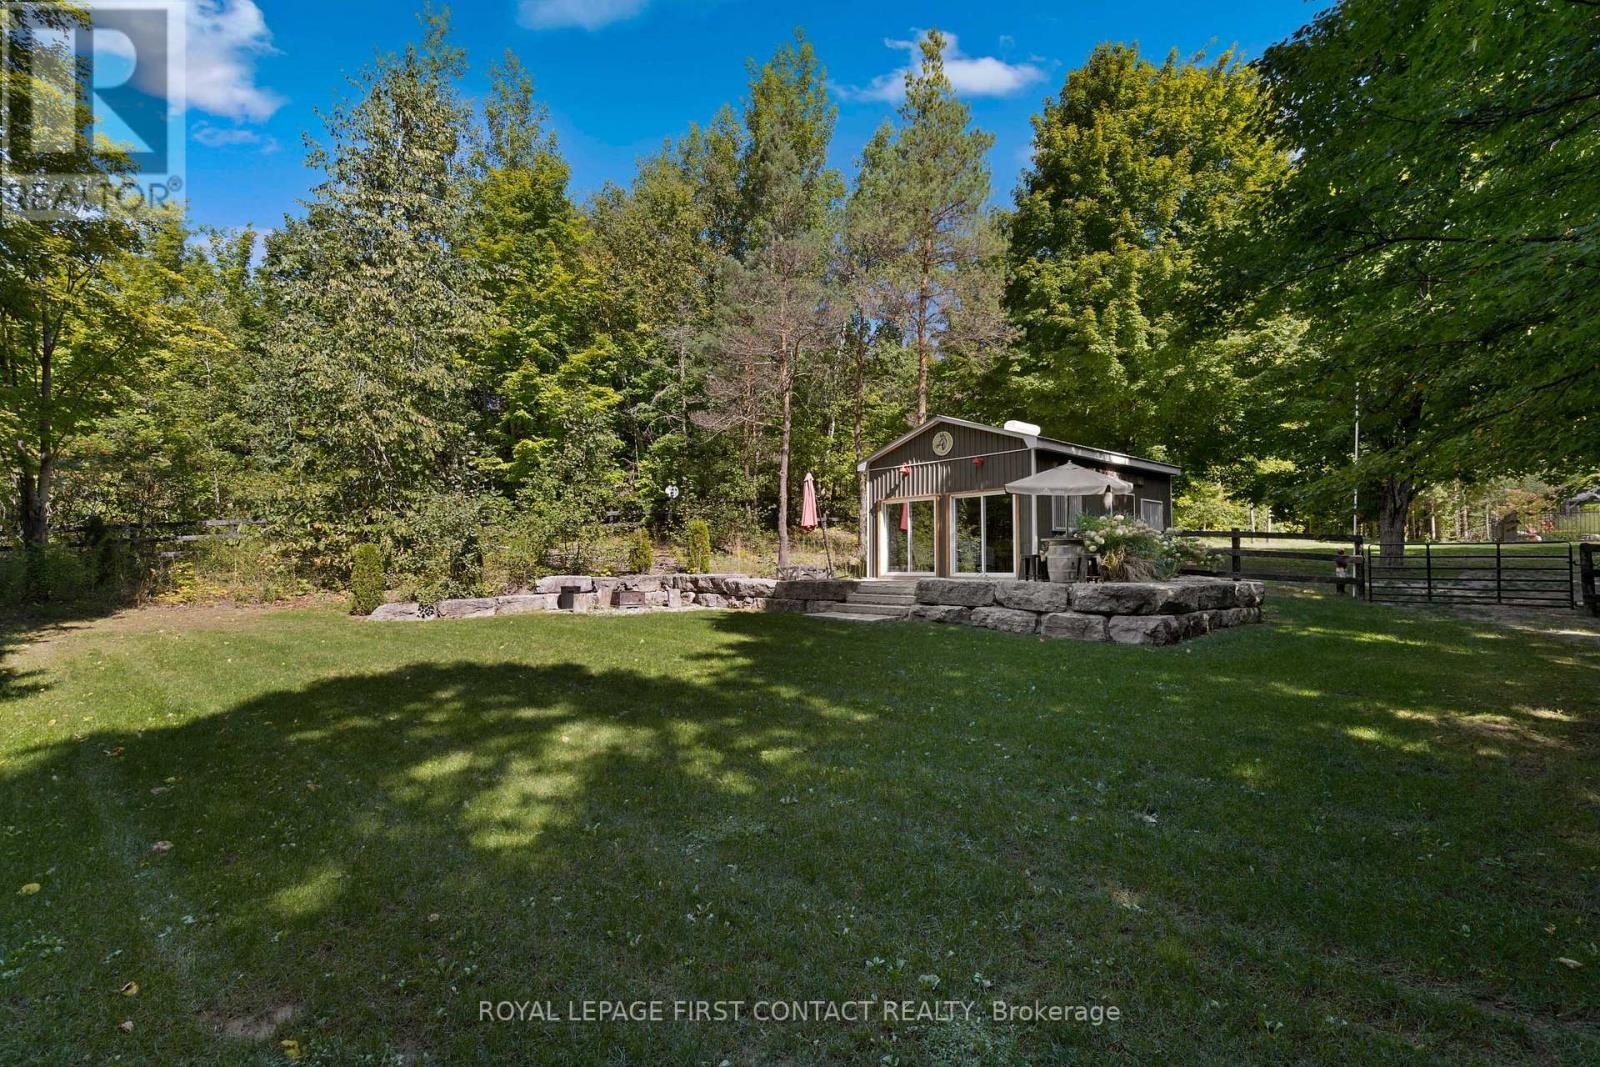 












316 OLD BARRIE ROAD EAST RD E

,
Oro-Medonte,




Ontario
L0L2E0

